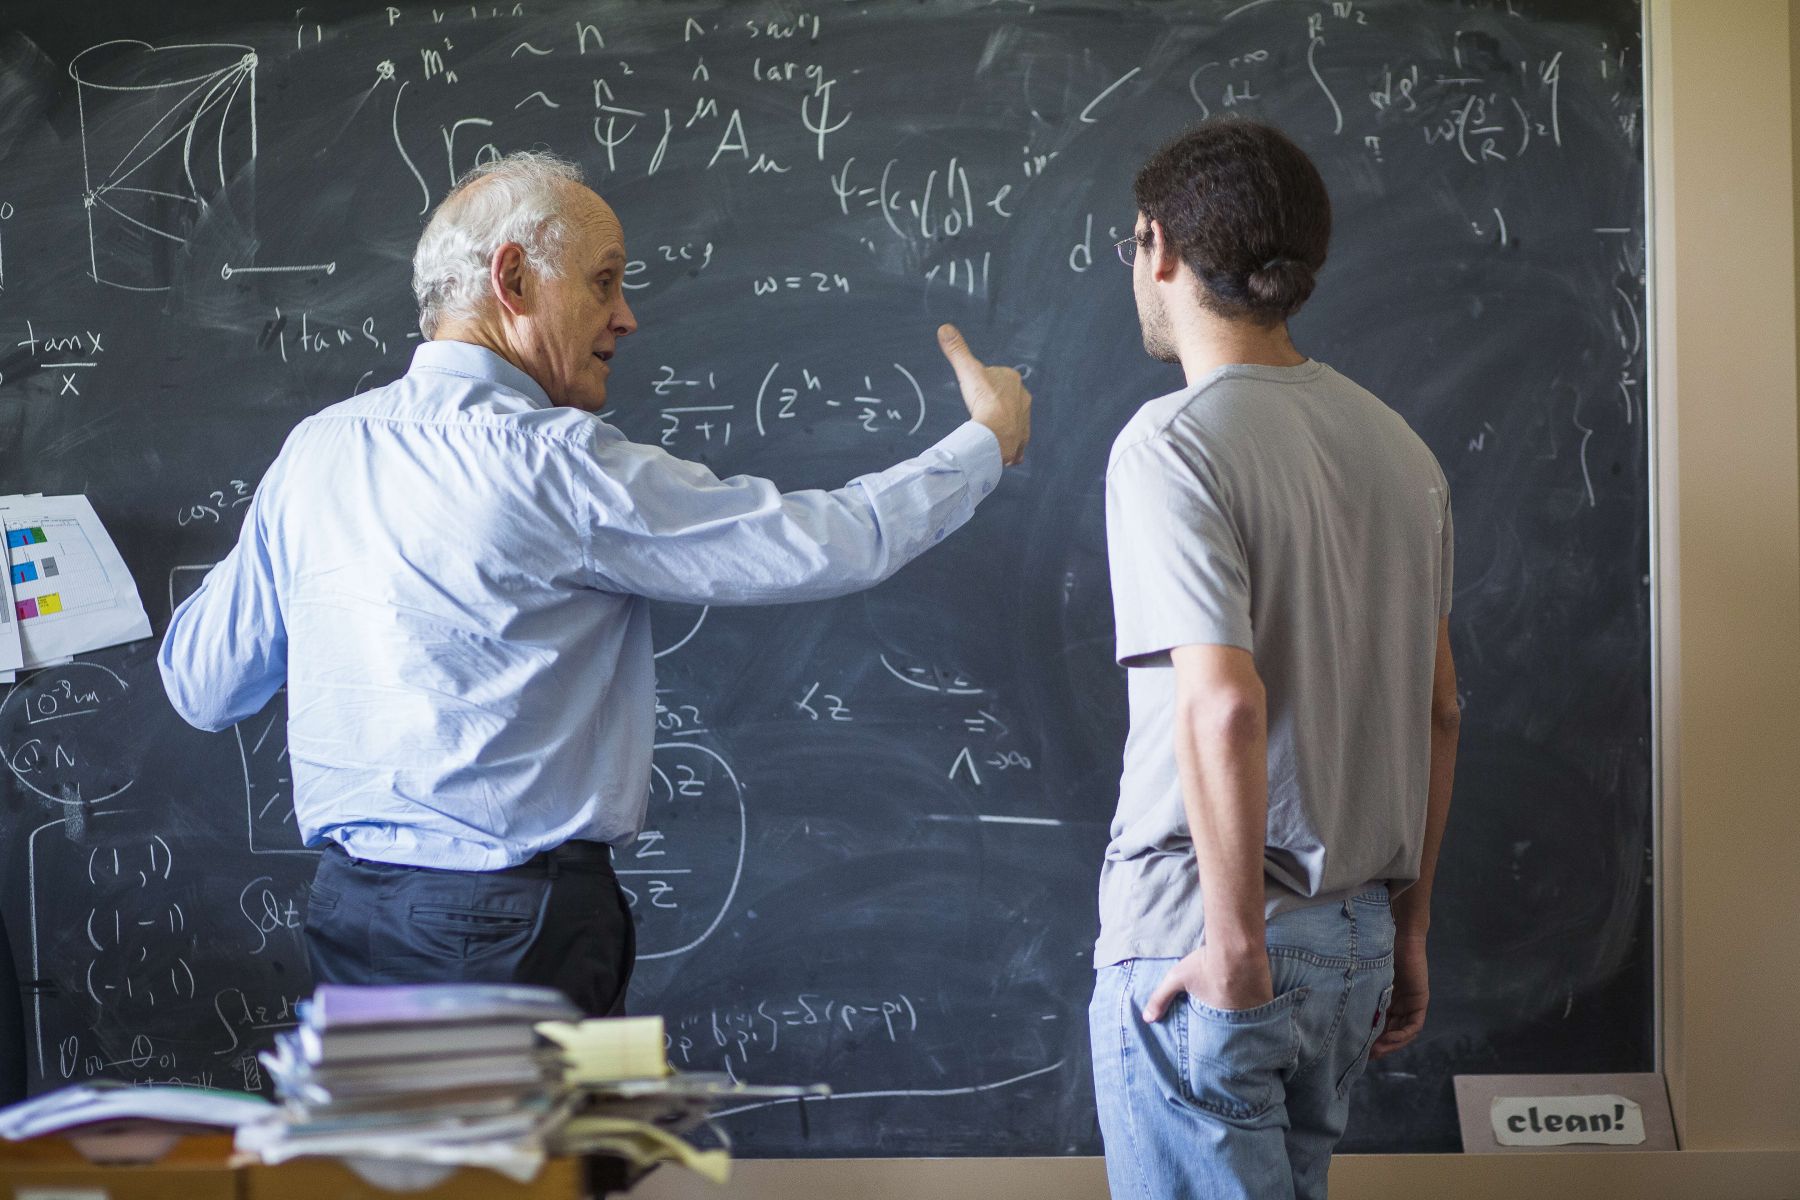 Two physicists at a blackboard